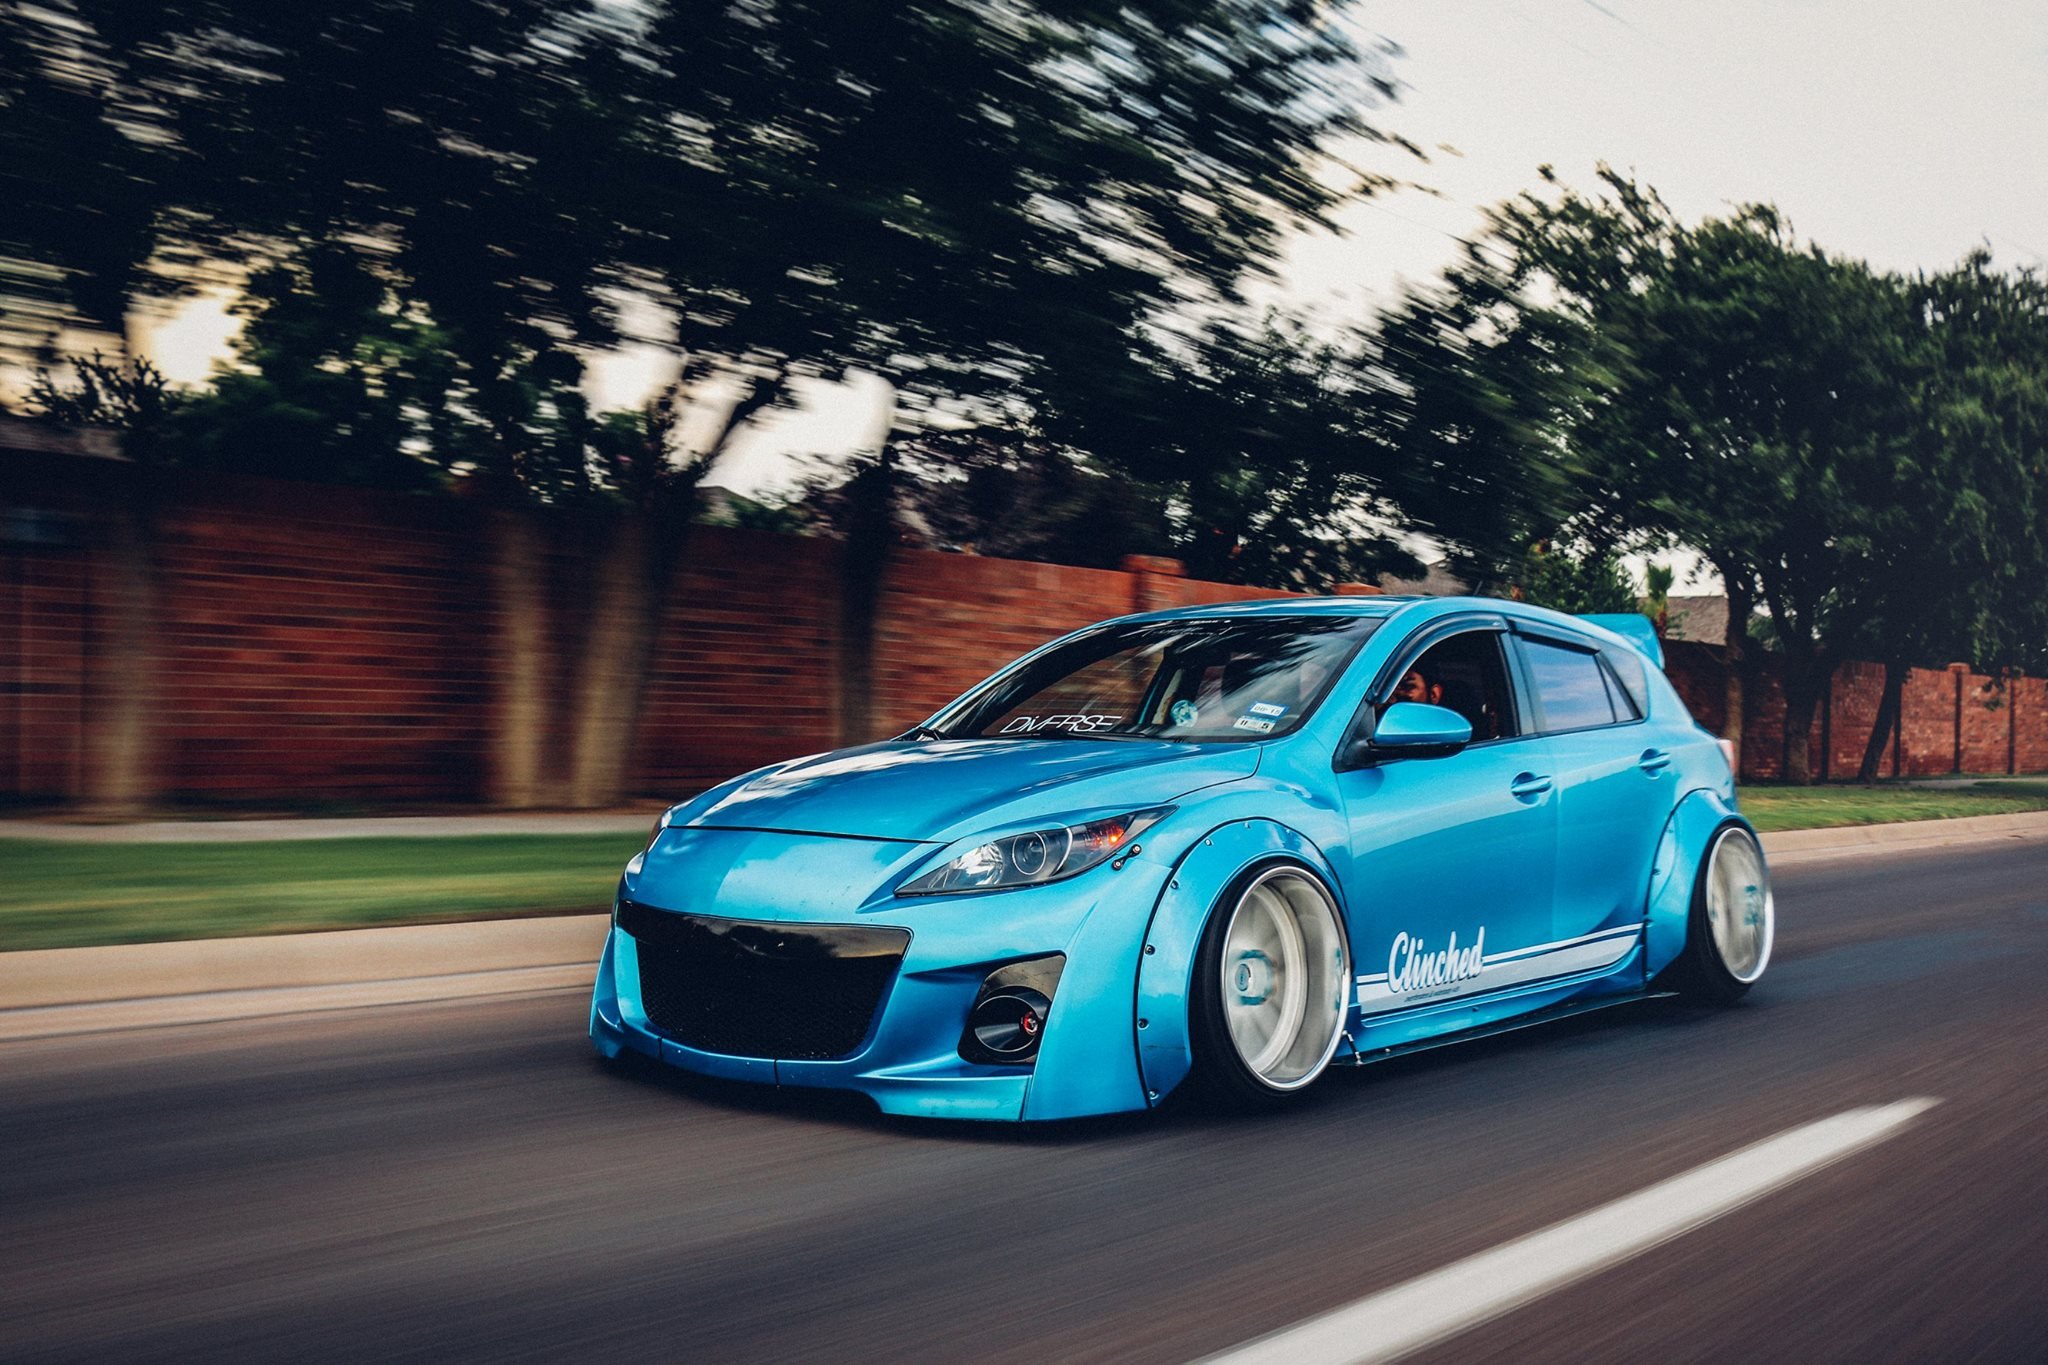 Blue Debadged Mazda 3 with Custom Wheels - Photo by Clinched